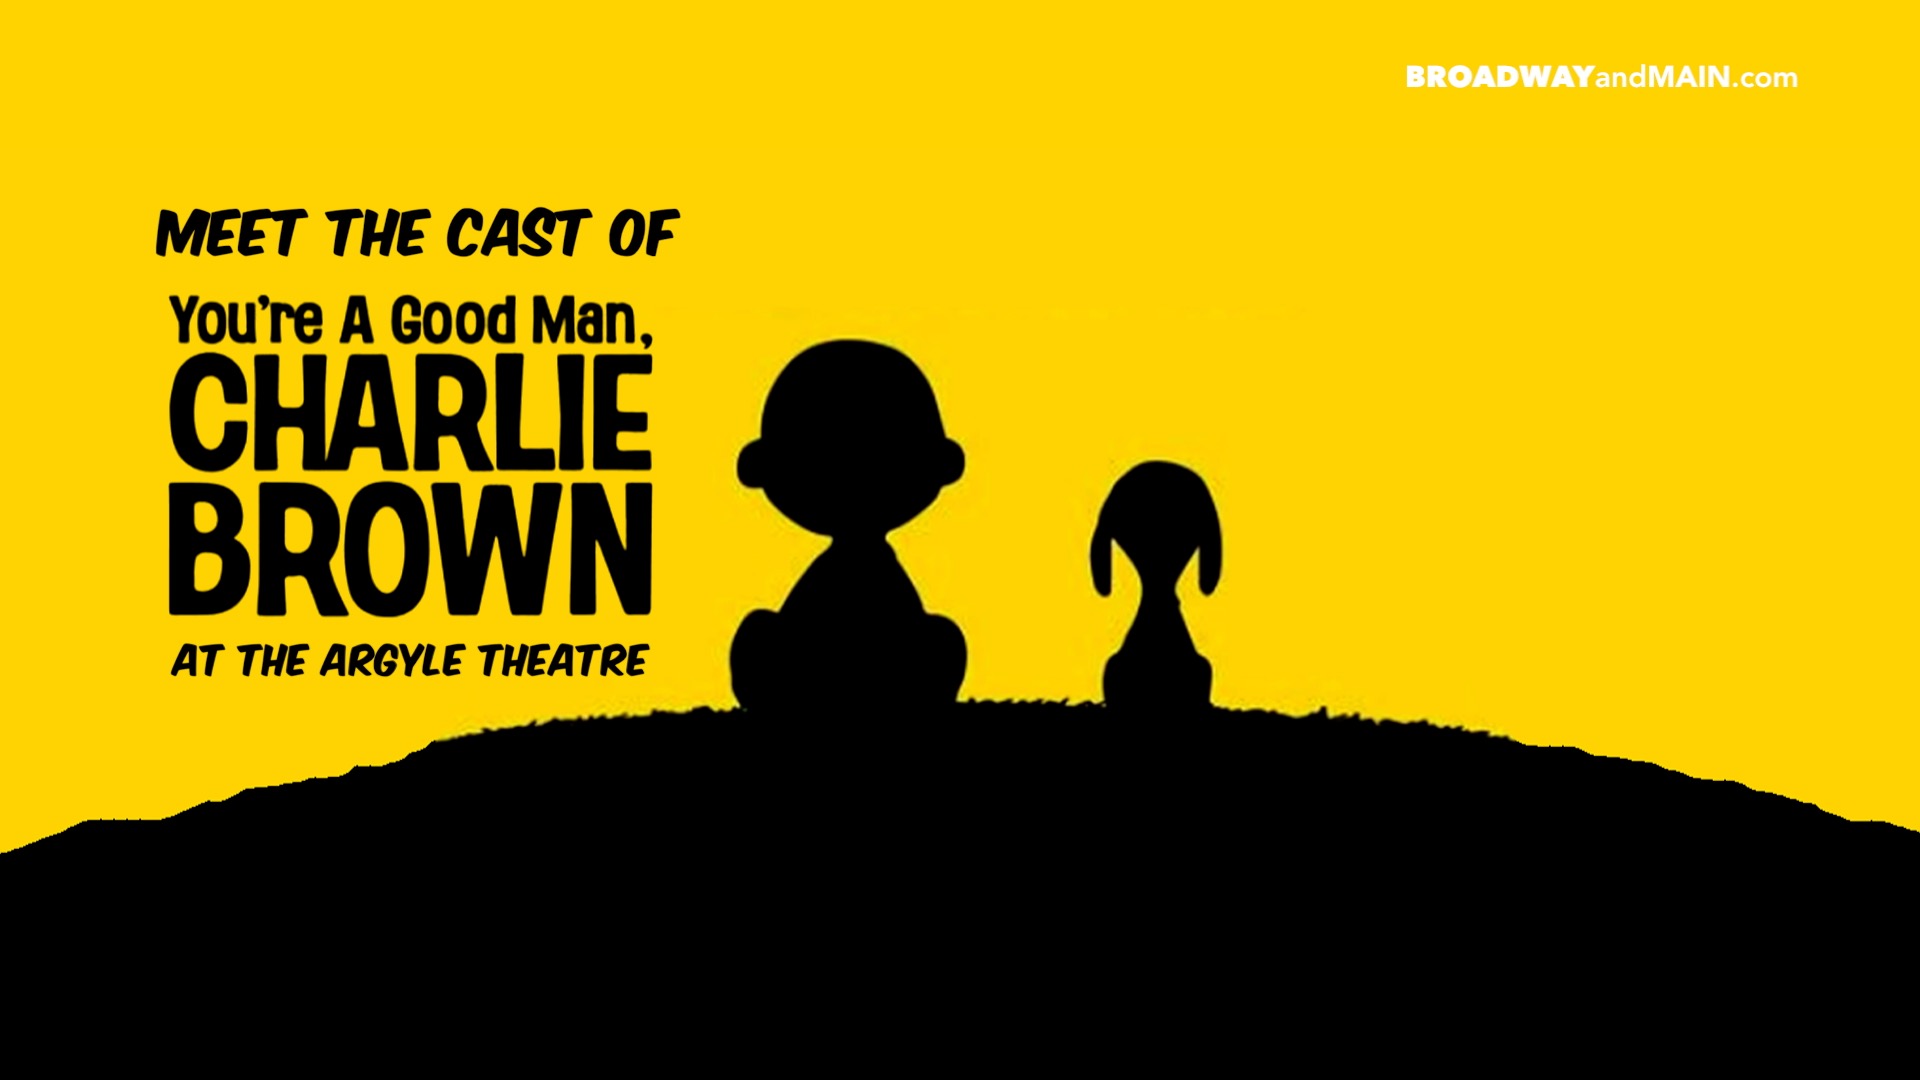 Meet The Cast of You're A Good Man Charlie Brown at the Argyle Theatre